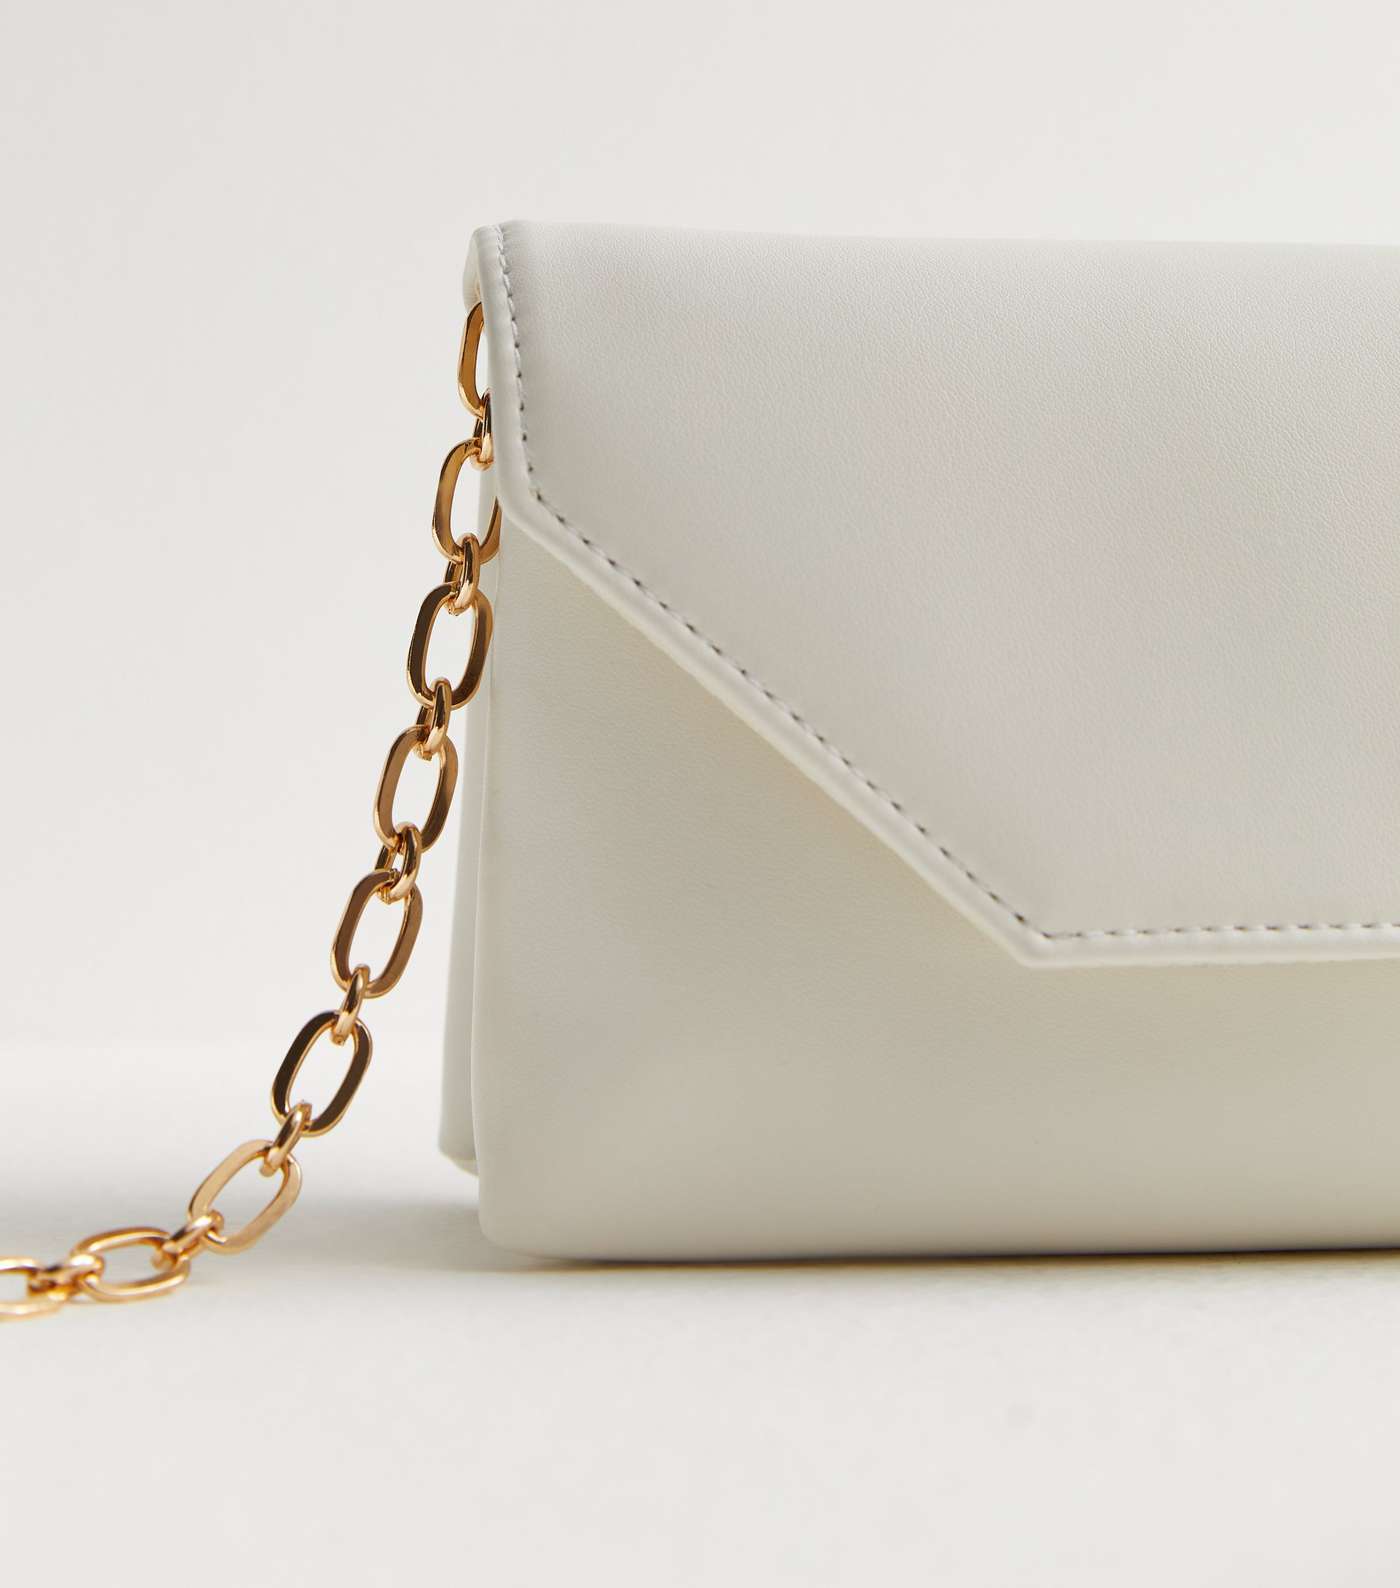 Cream Leather-Look Clutch Bag Image 3